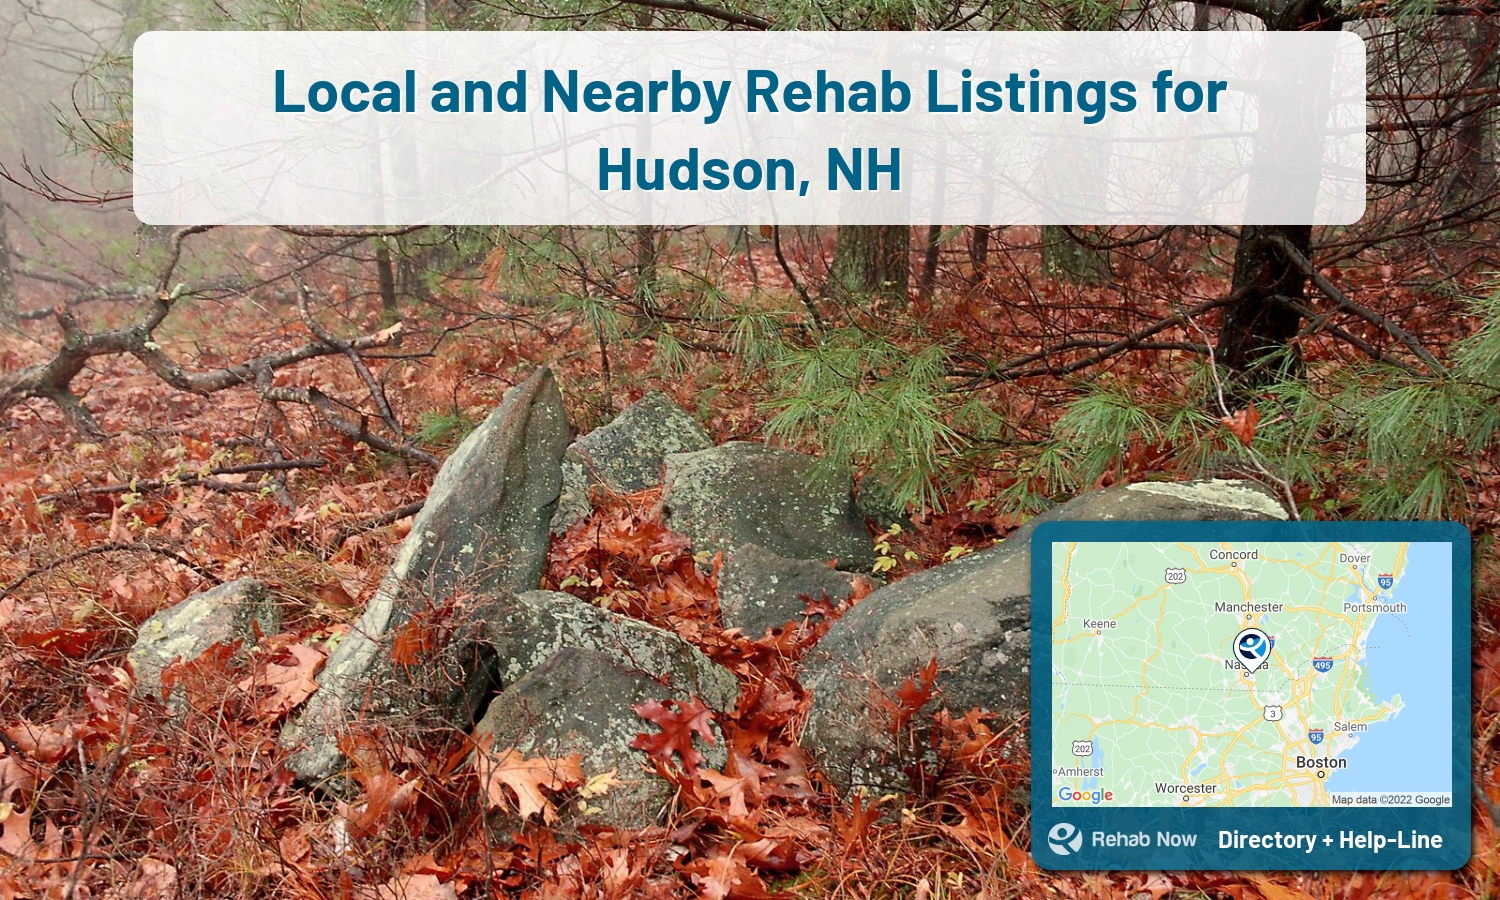 Hudson, NH Treatment Centers. Find drug rehab in Hudson, New Hampshire, or detox and treatment programs. Get the right help now!